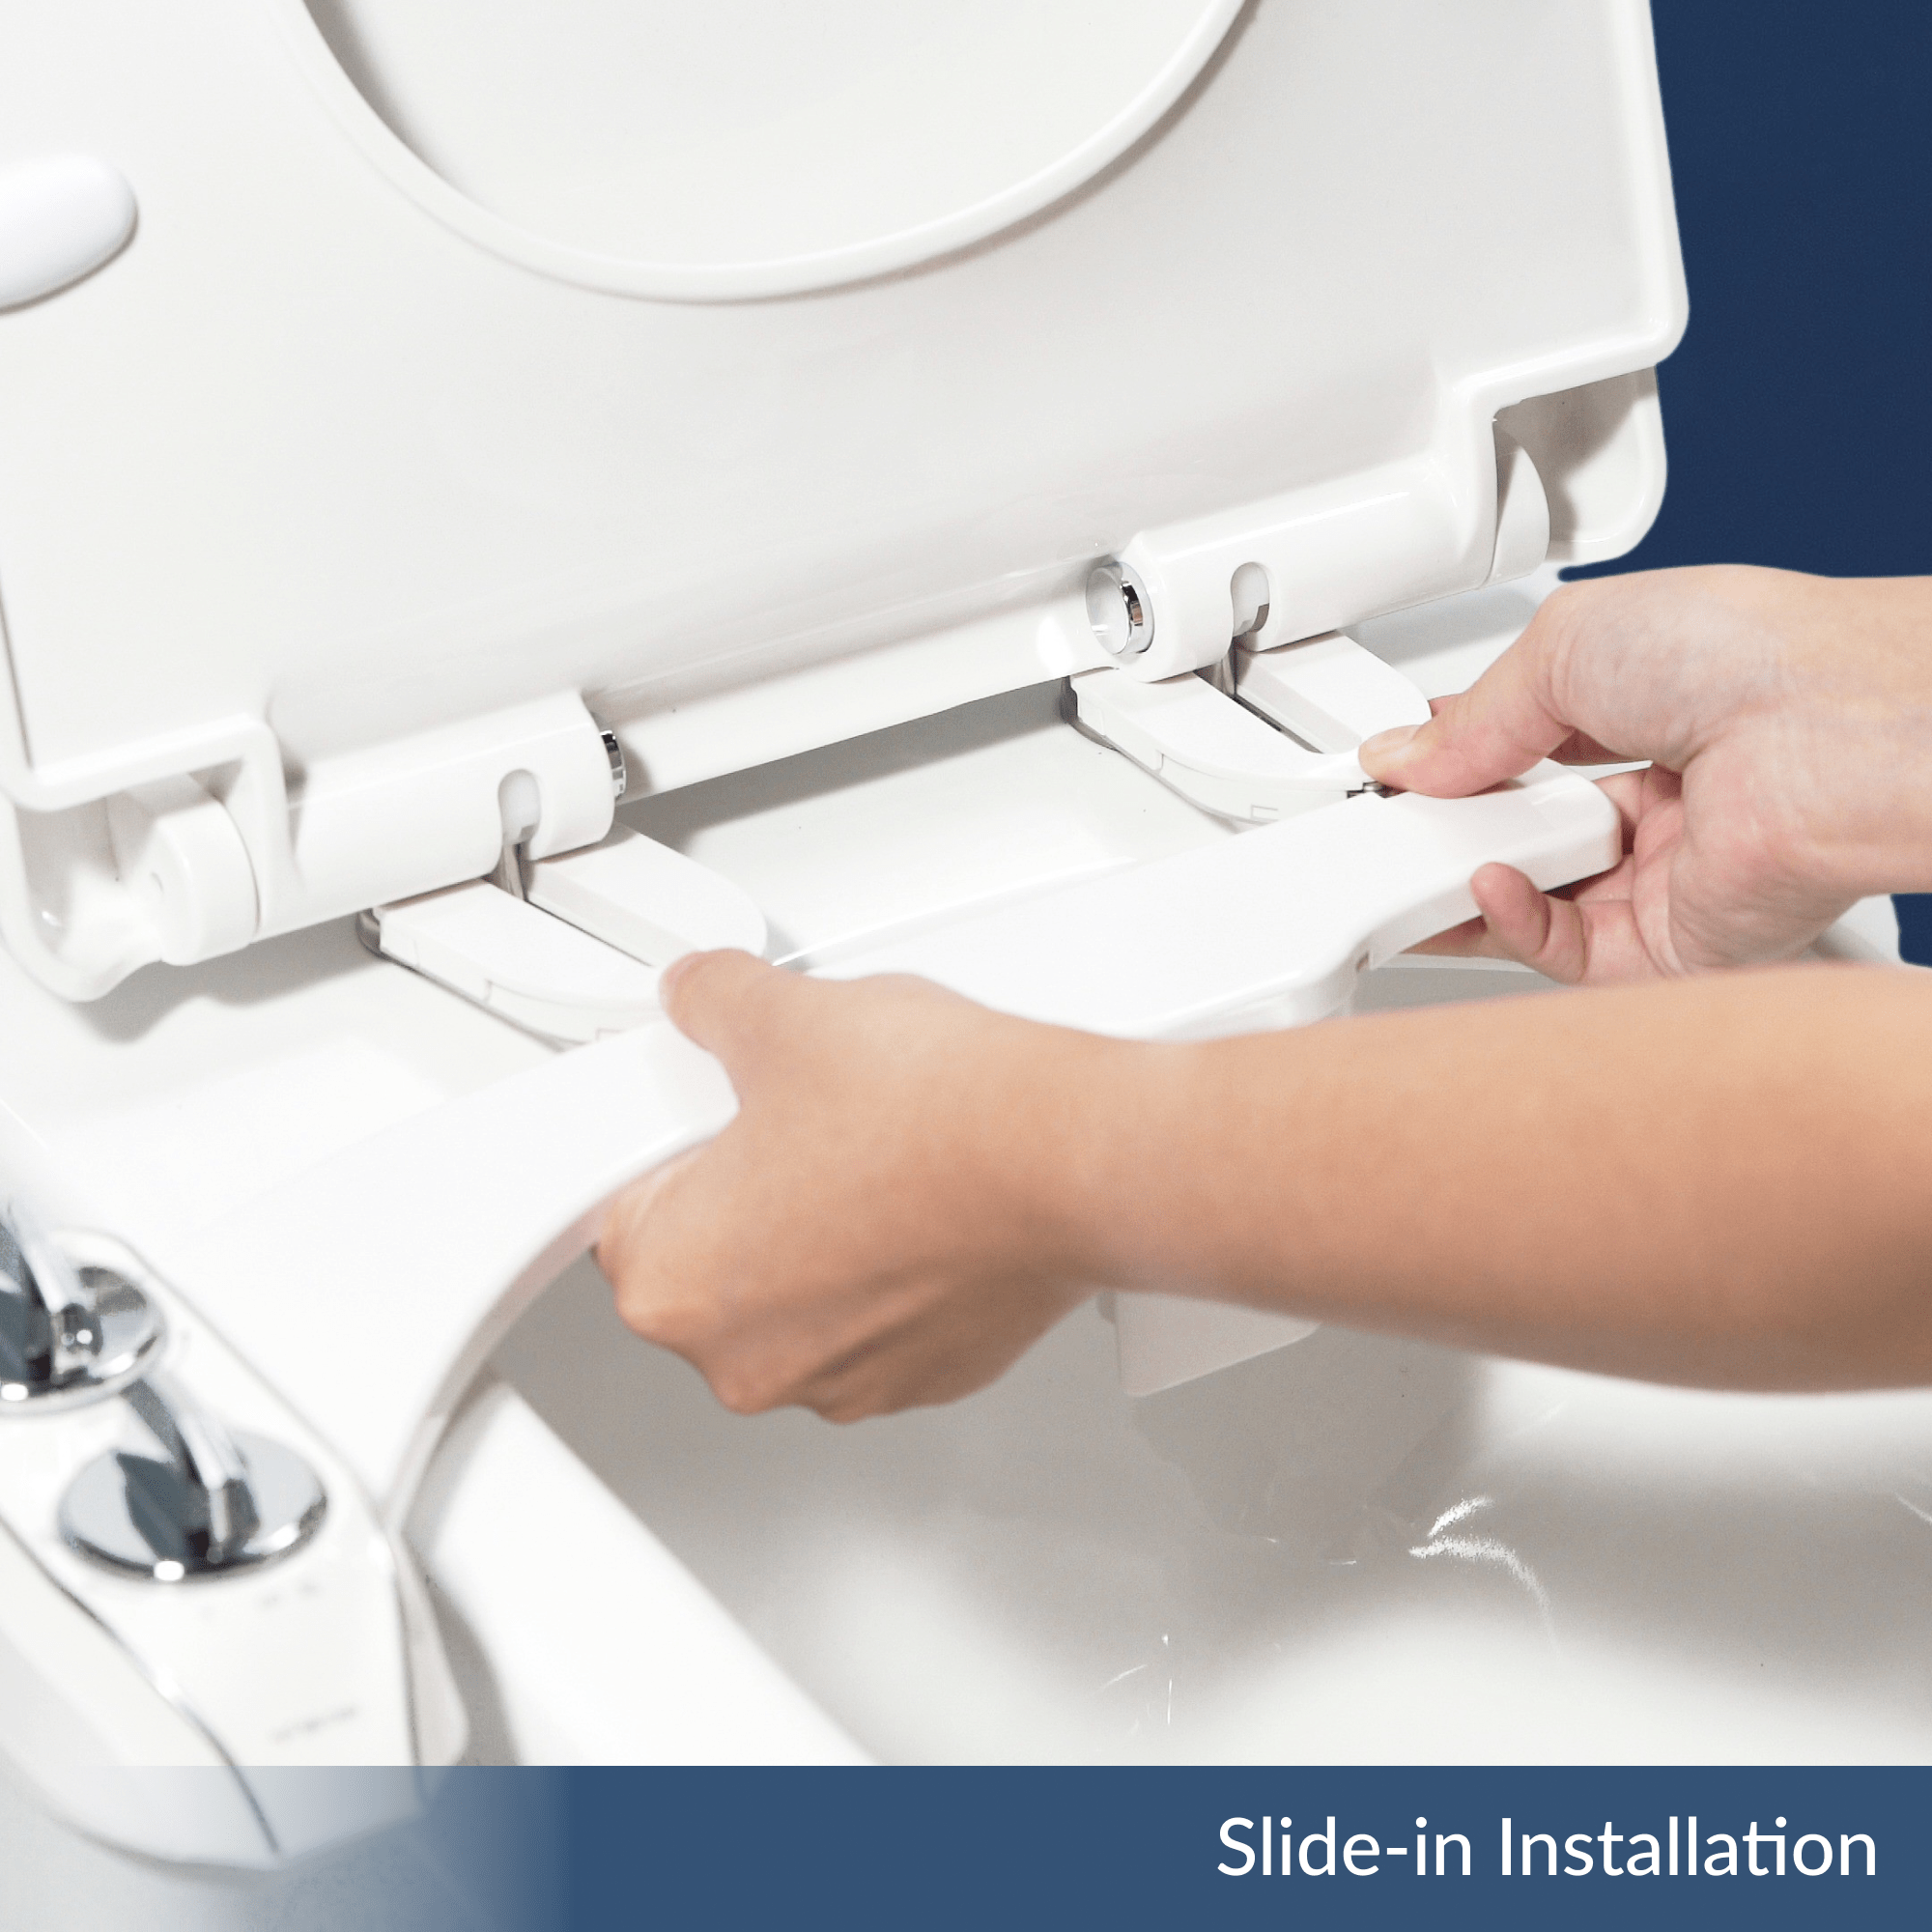 Slide-in Installation feature of NEO Plus series allows user to slide bidet body under toilet lid to install